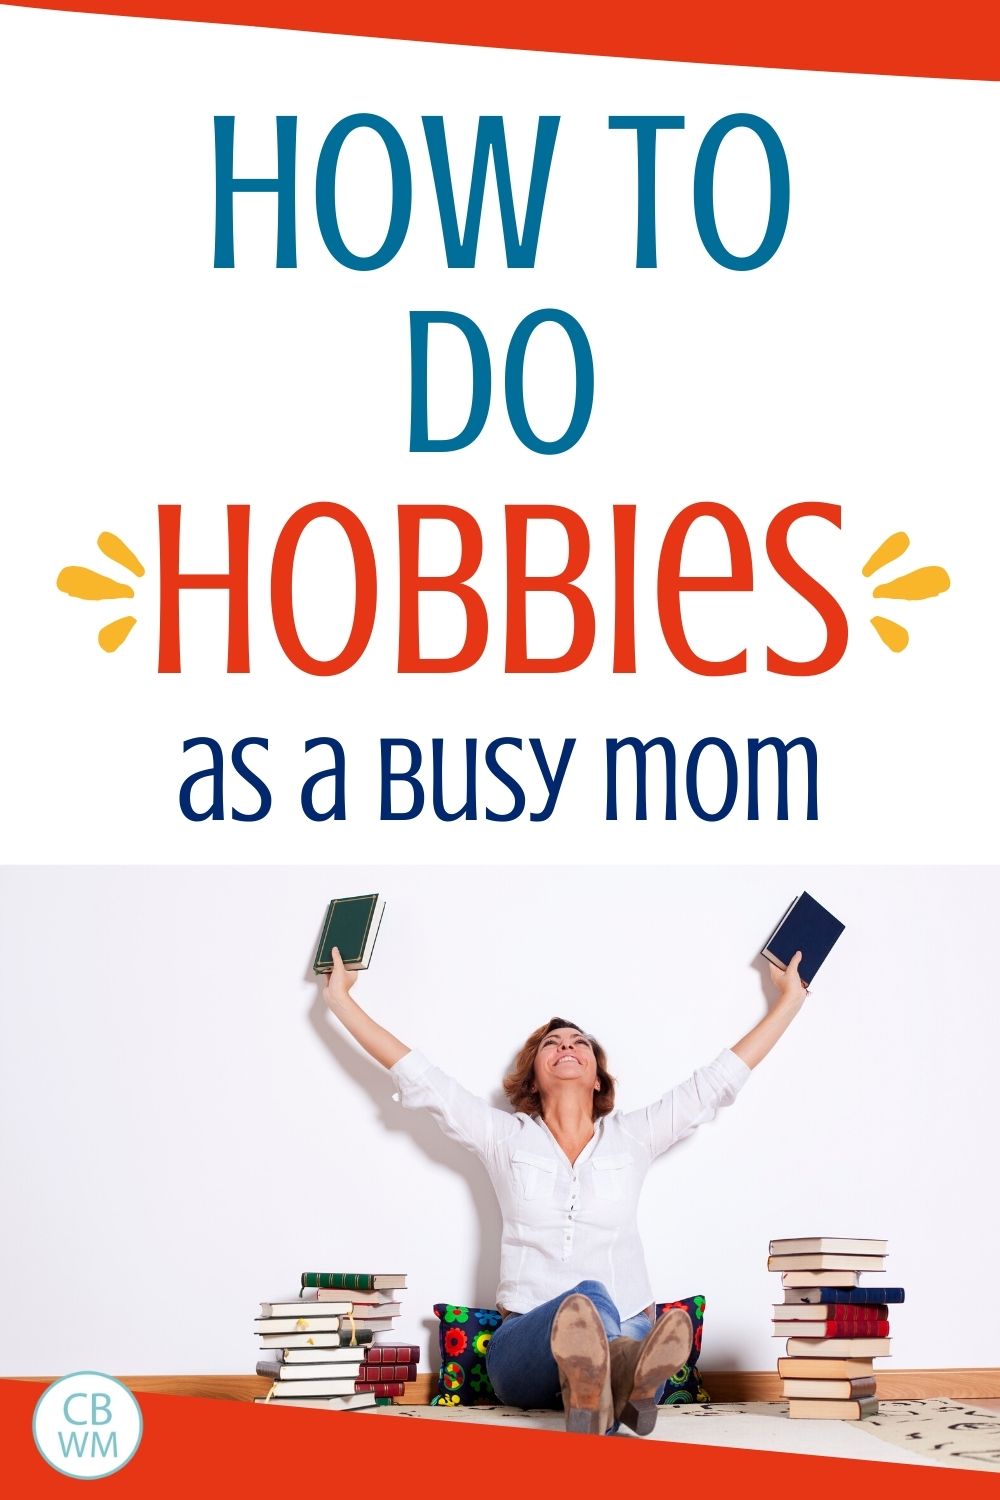 How to do hobbies as a busy mom pin 